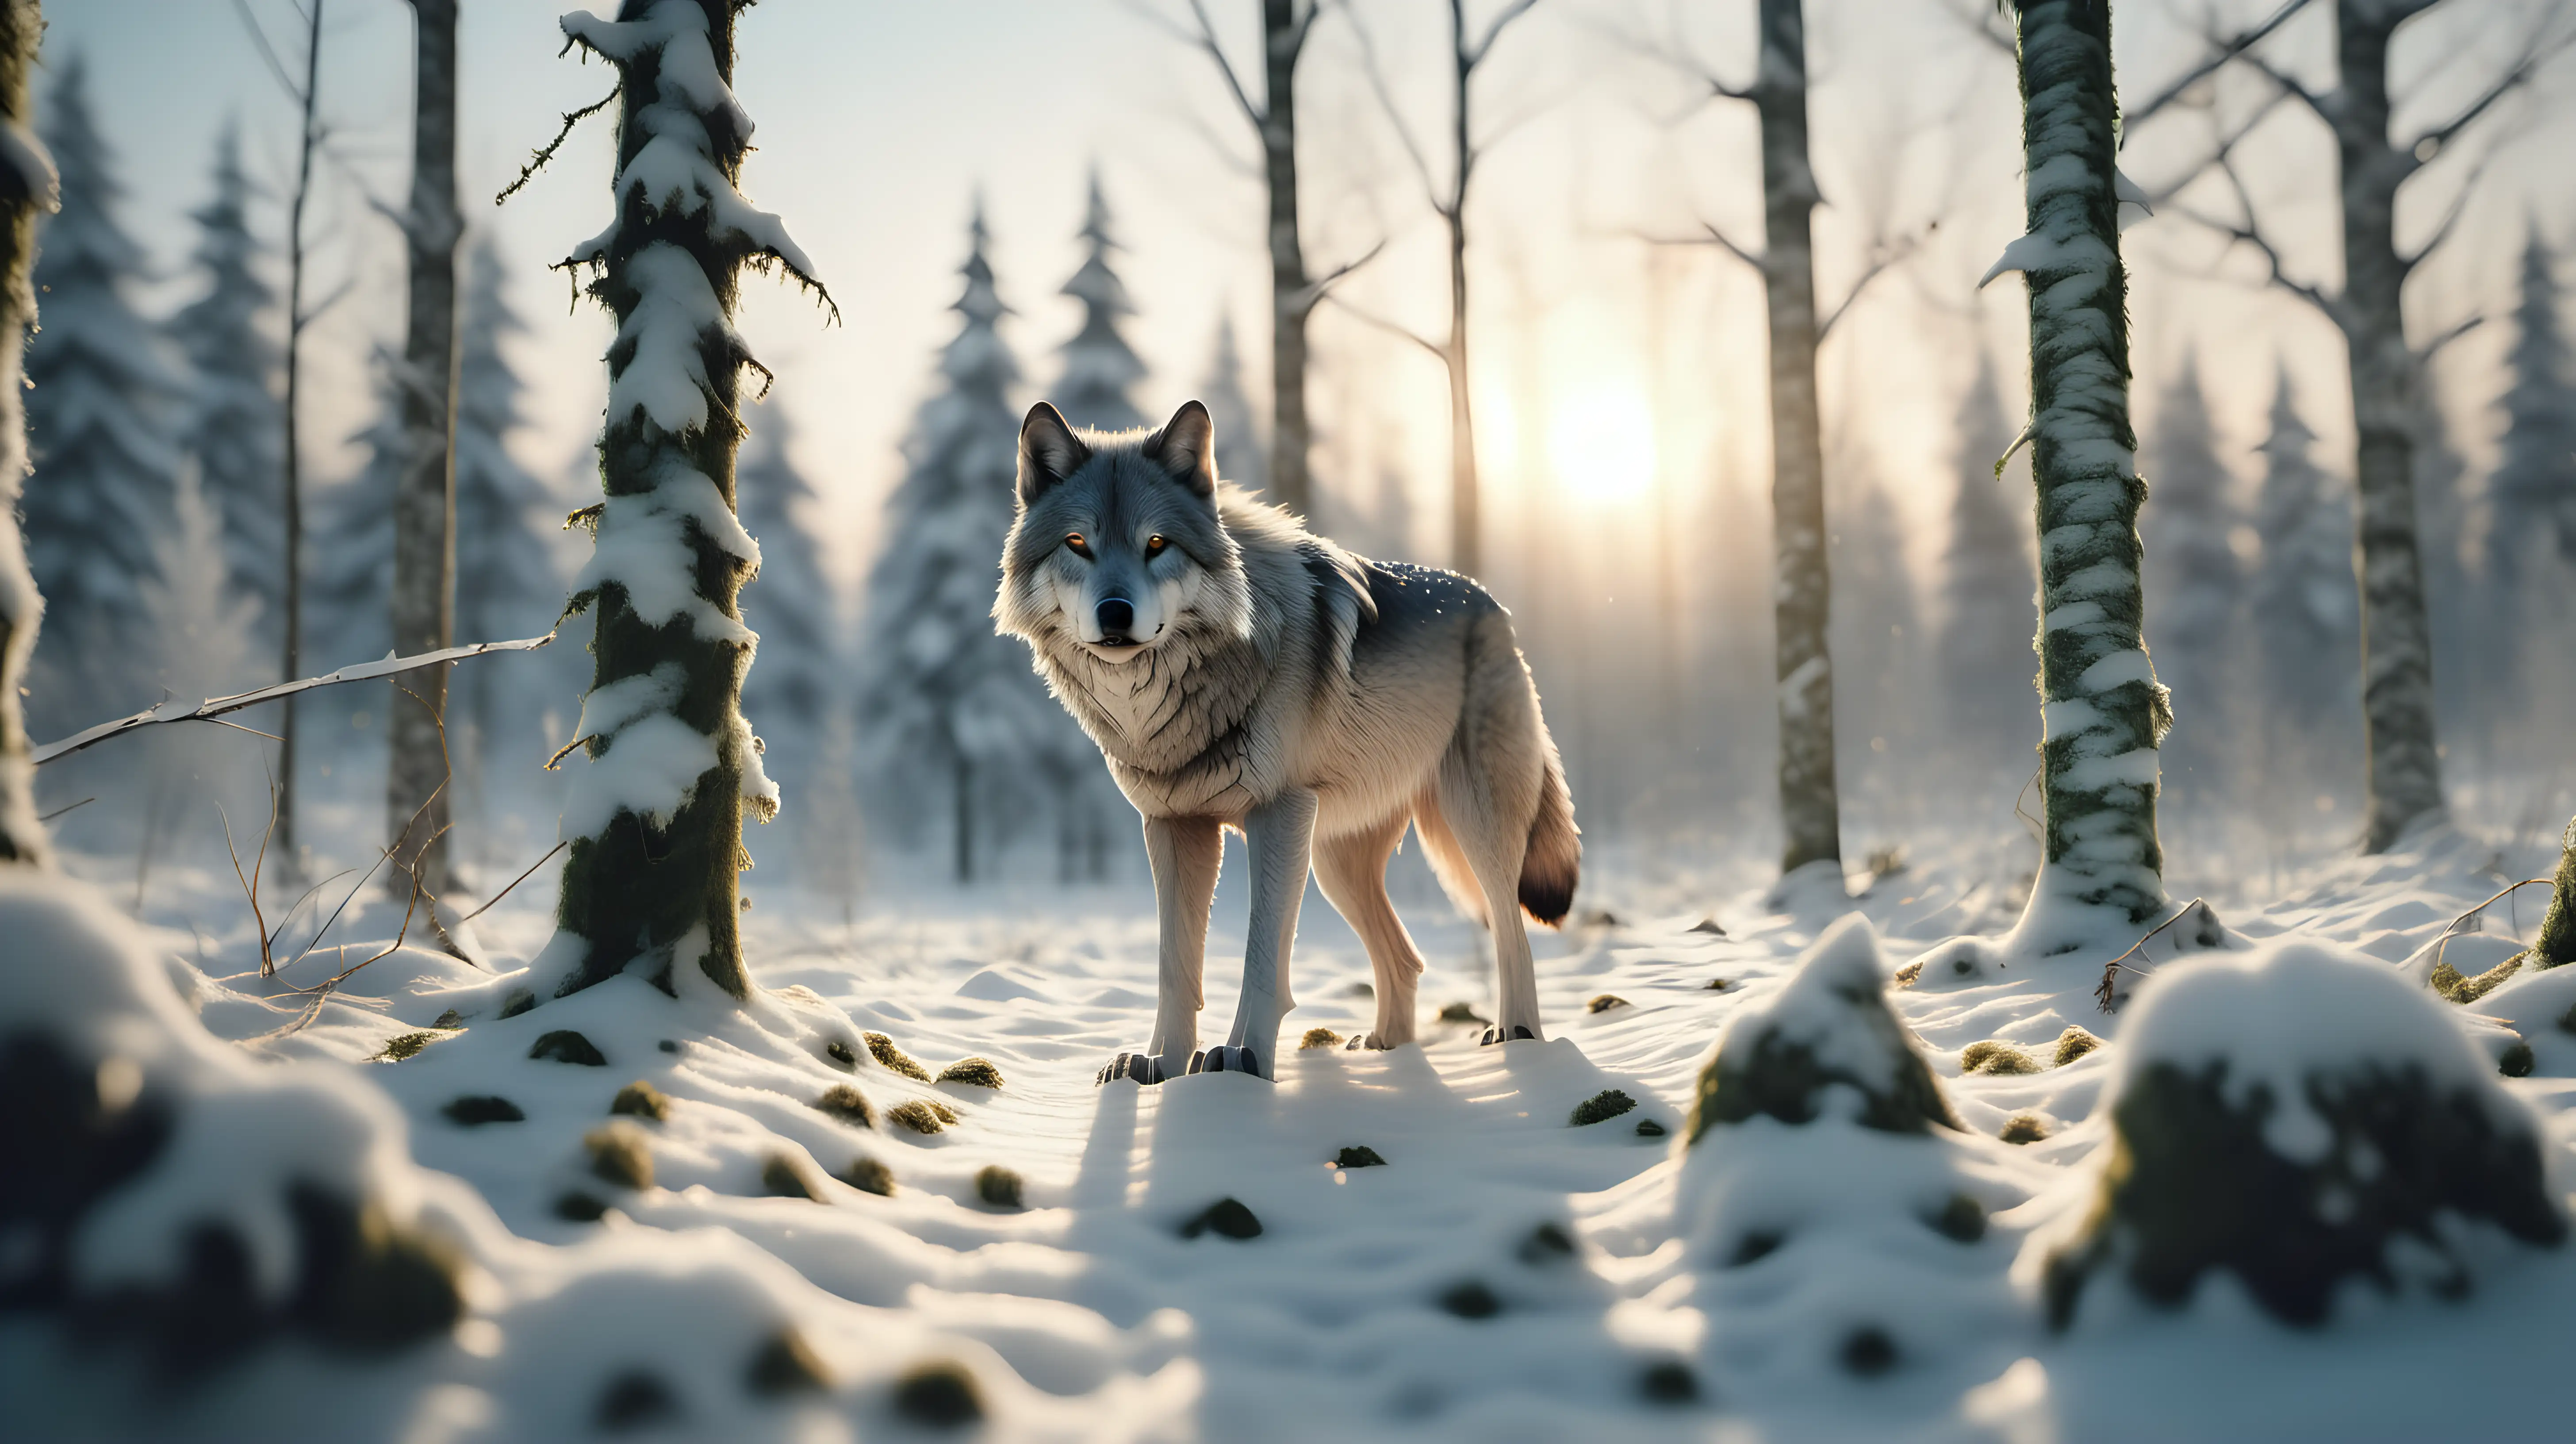 Majestic Wolf Journeying through Enchanting Snow Forest at Sunset